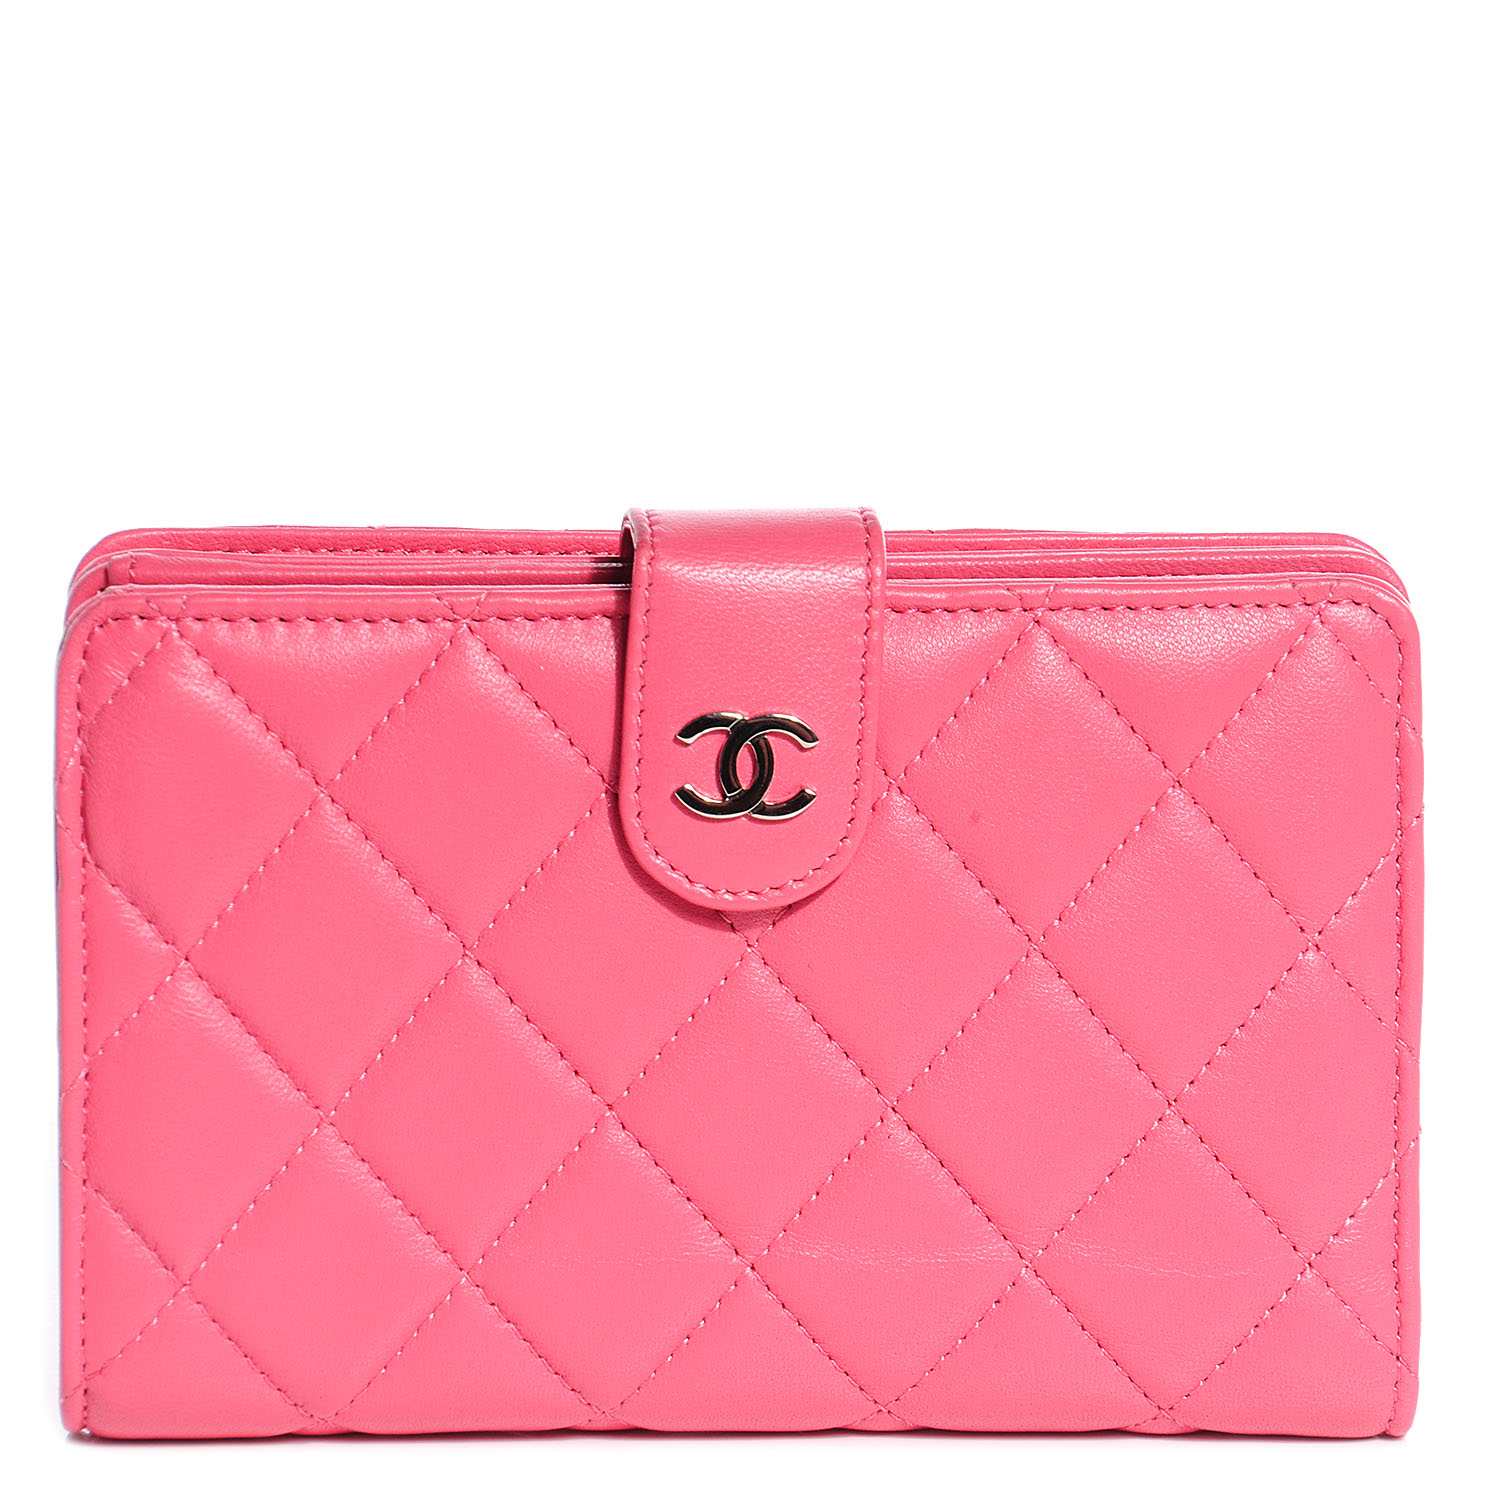 CHANEL Lambskin Quilted Large Zip Pocket Wallet Pink 88182 | FASHIONPHILE